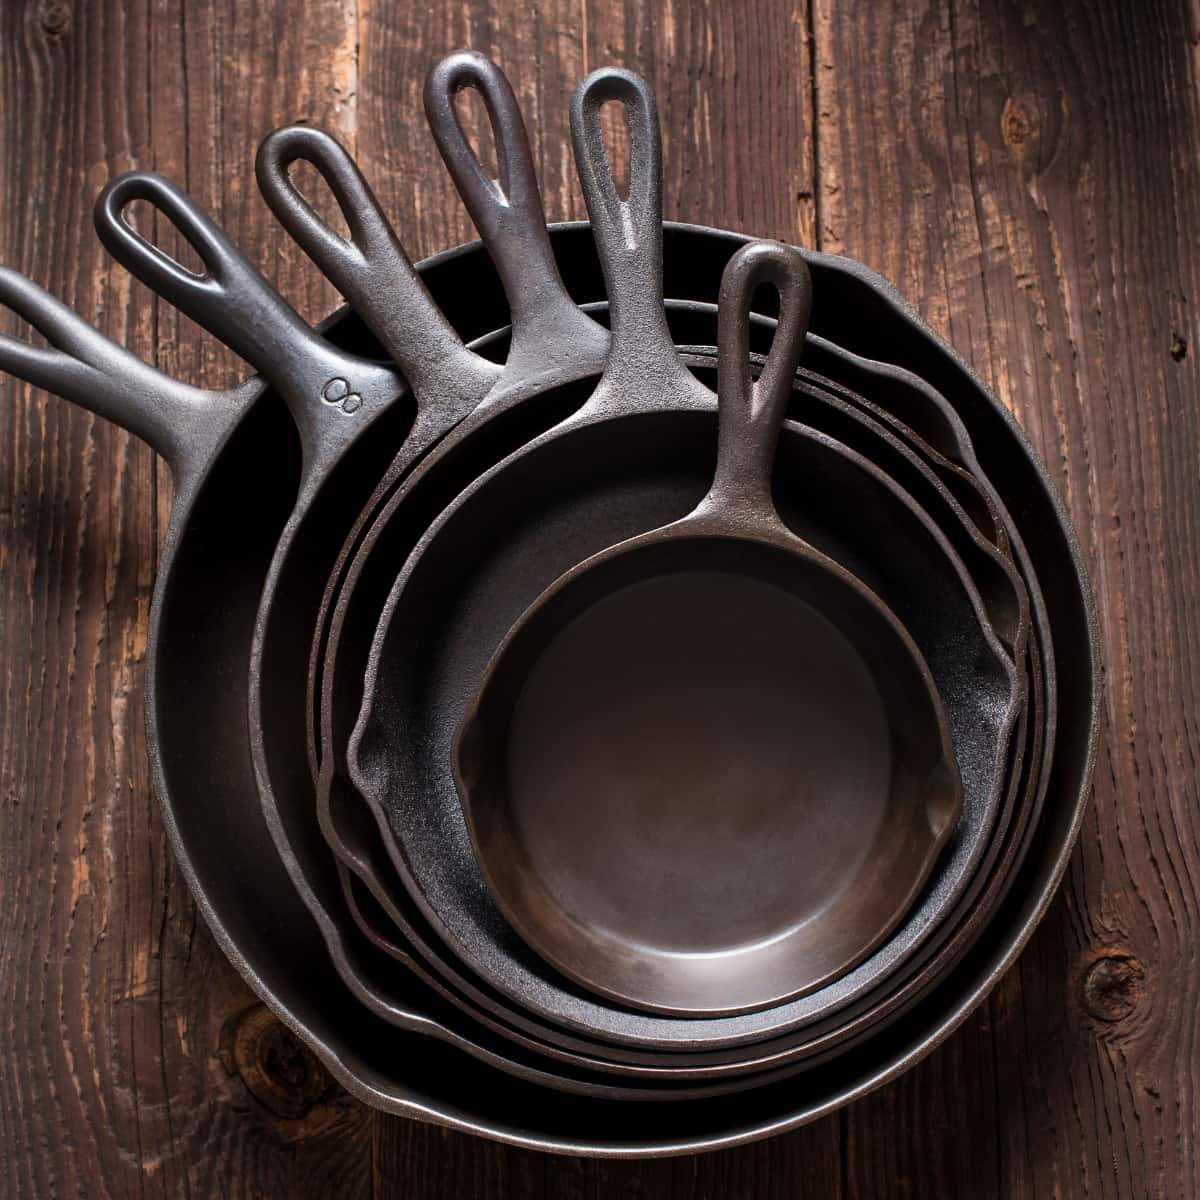 A pile of cast iron skillets on a wooden table.